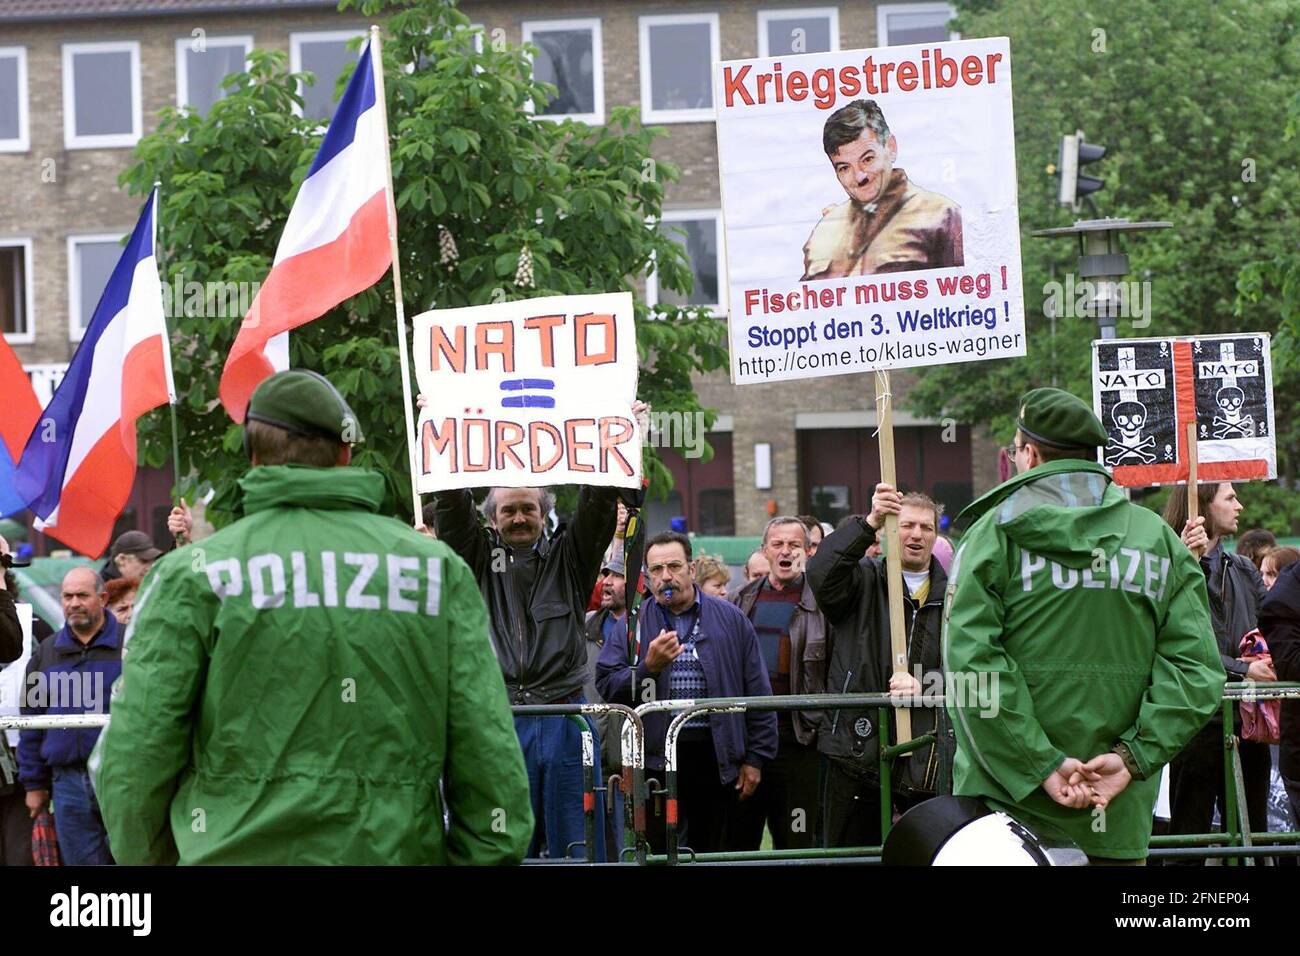 (13.05.1999) Bielefeld, Serbs demonstrate against the Nato air attacks and against Foreign Minister Joschka Fischer before the special party conference of Bündnis 90/Die Grünen in Bielefeld. The Greens discuss the Nato intervention at their party conference in the Seidenstickerhalle. [automated translation] Stock Photo